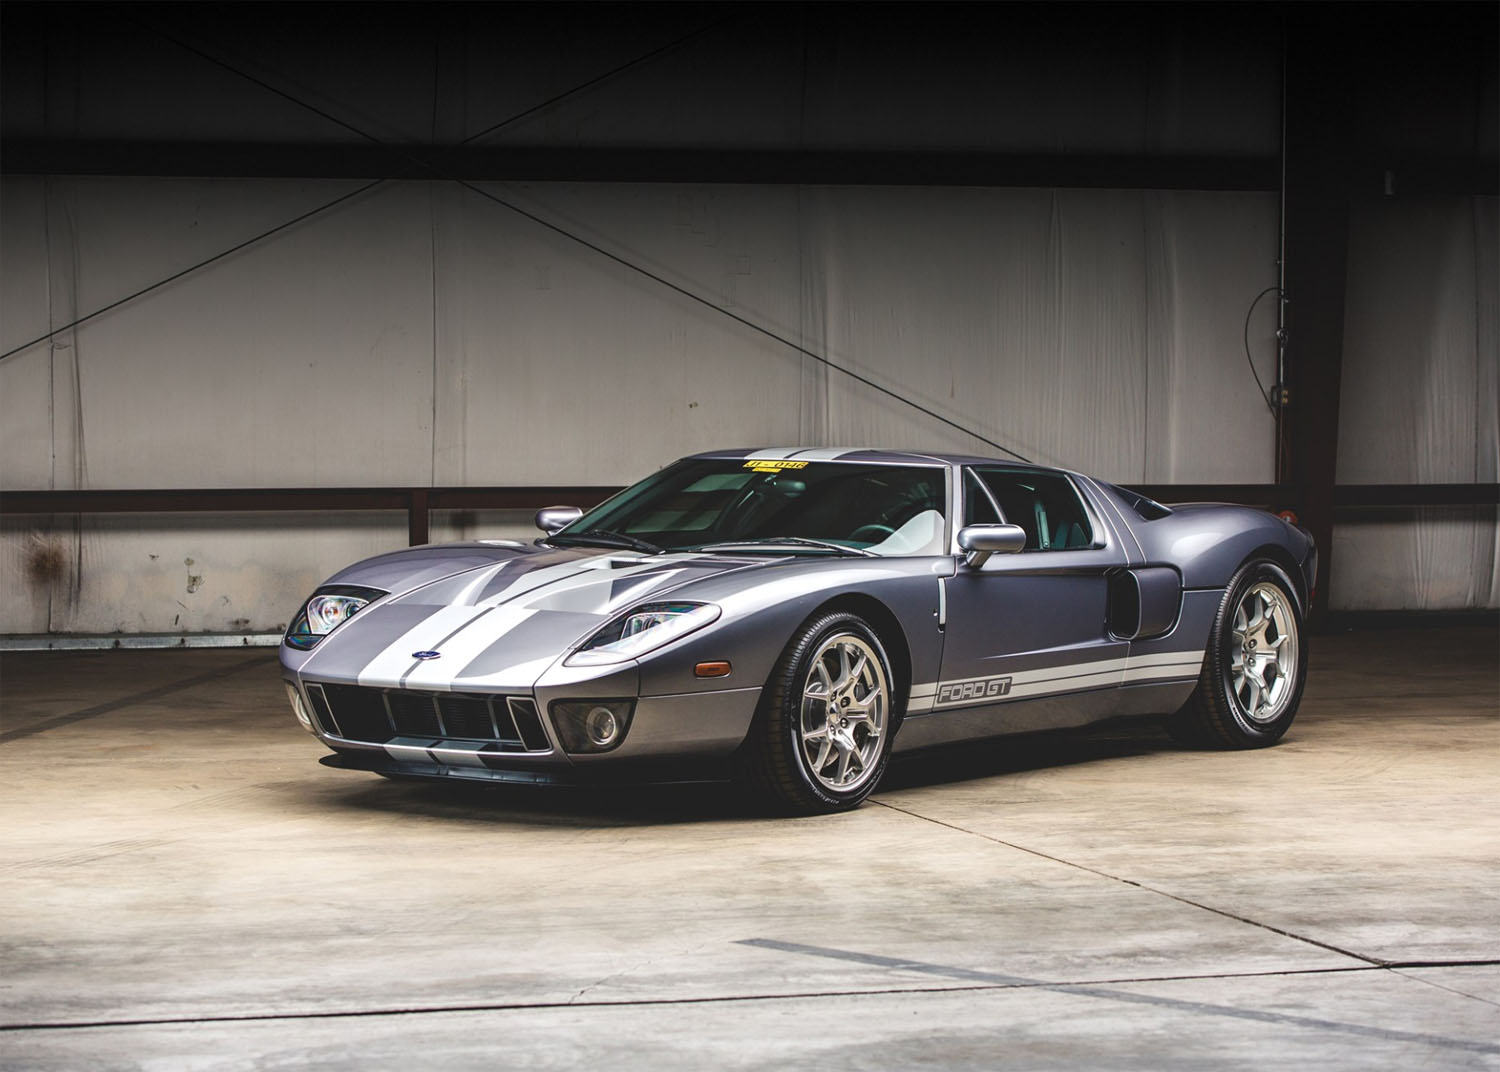 2006 Ford GT Up For Auction Has Only 89 Miles On It